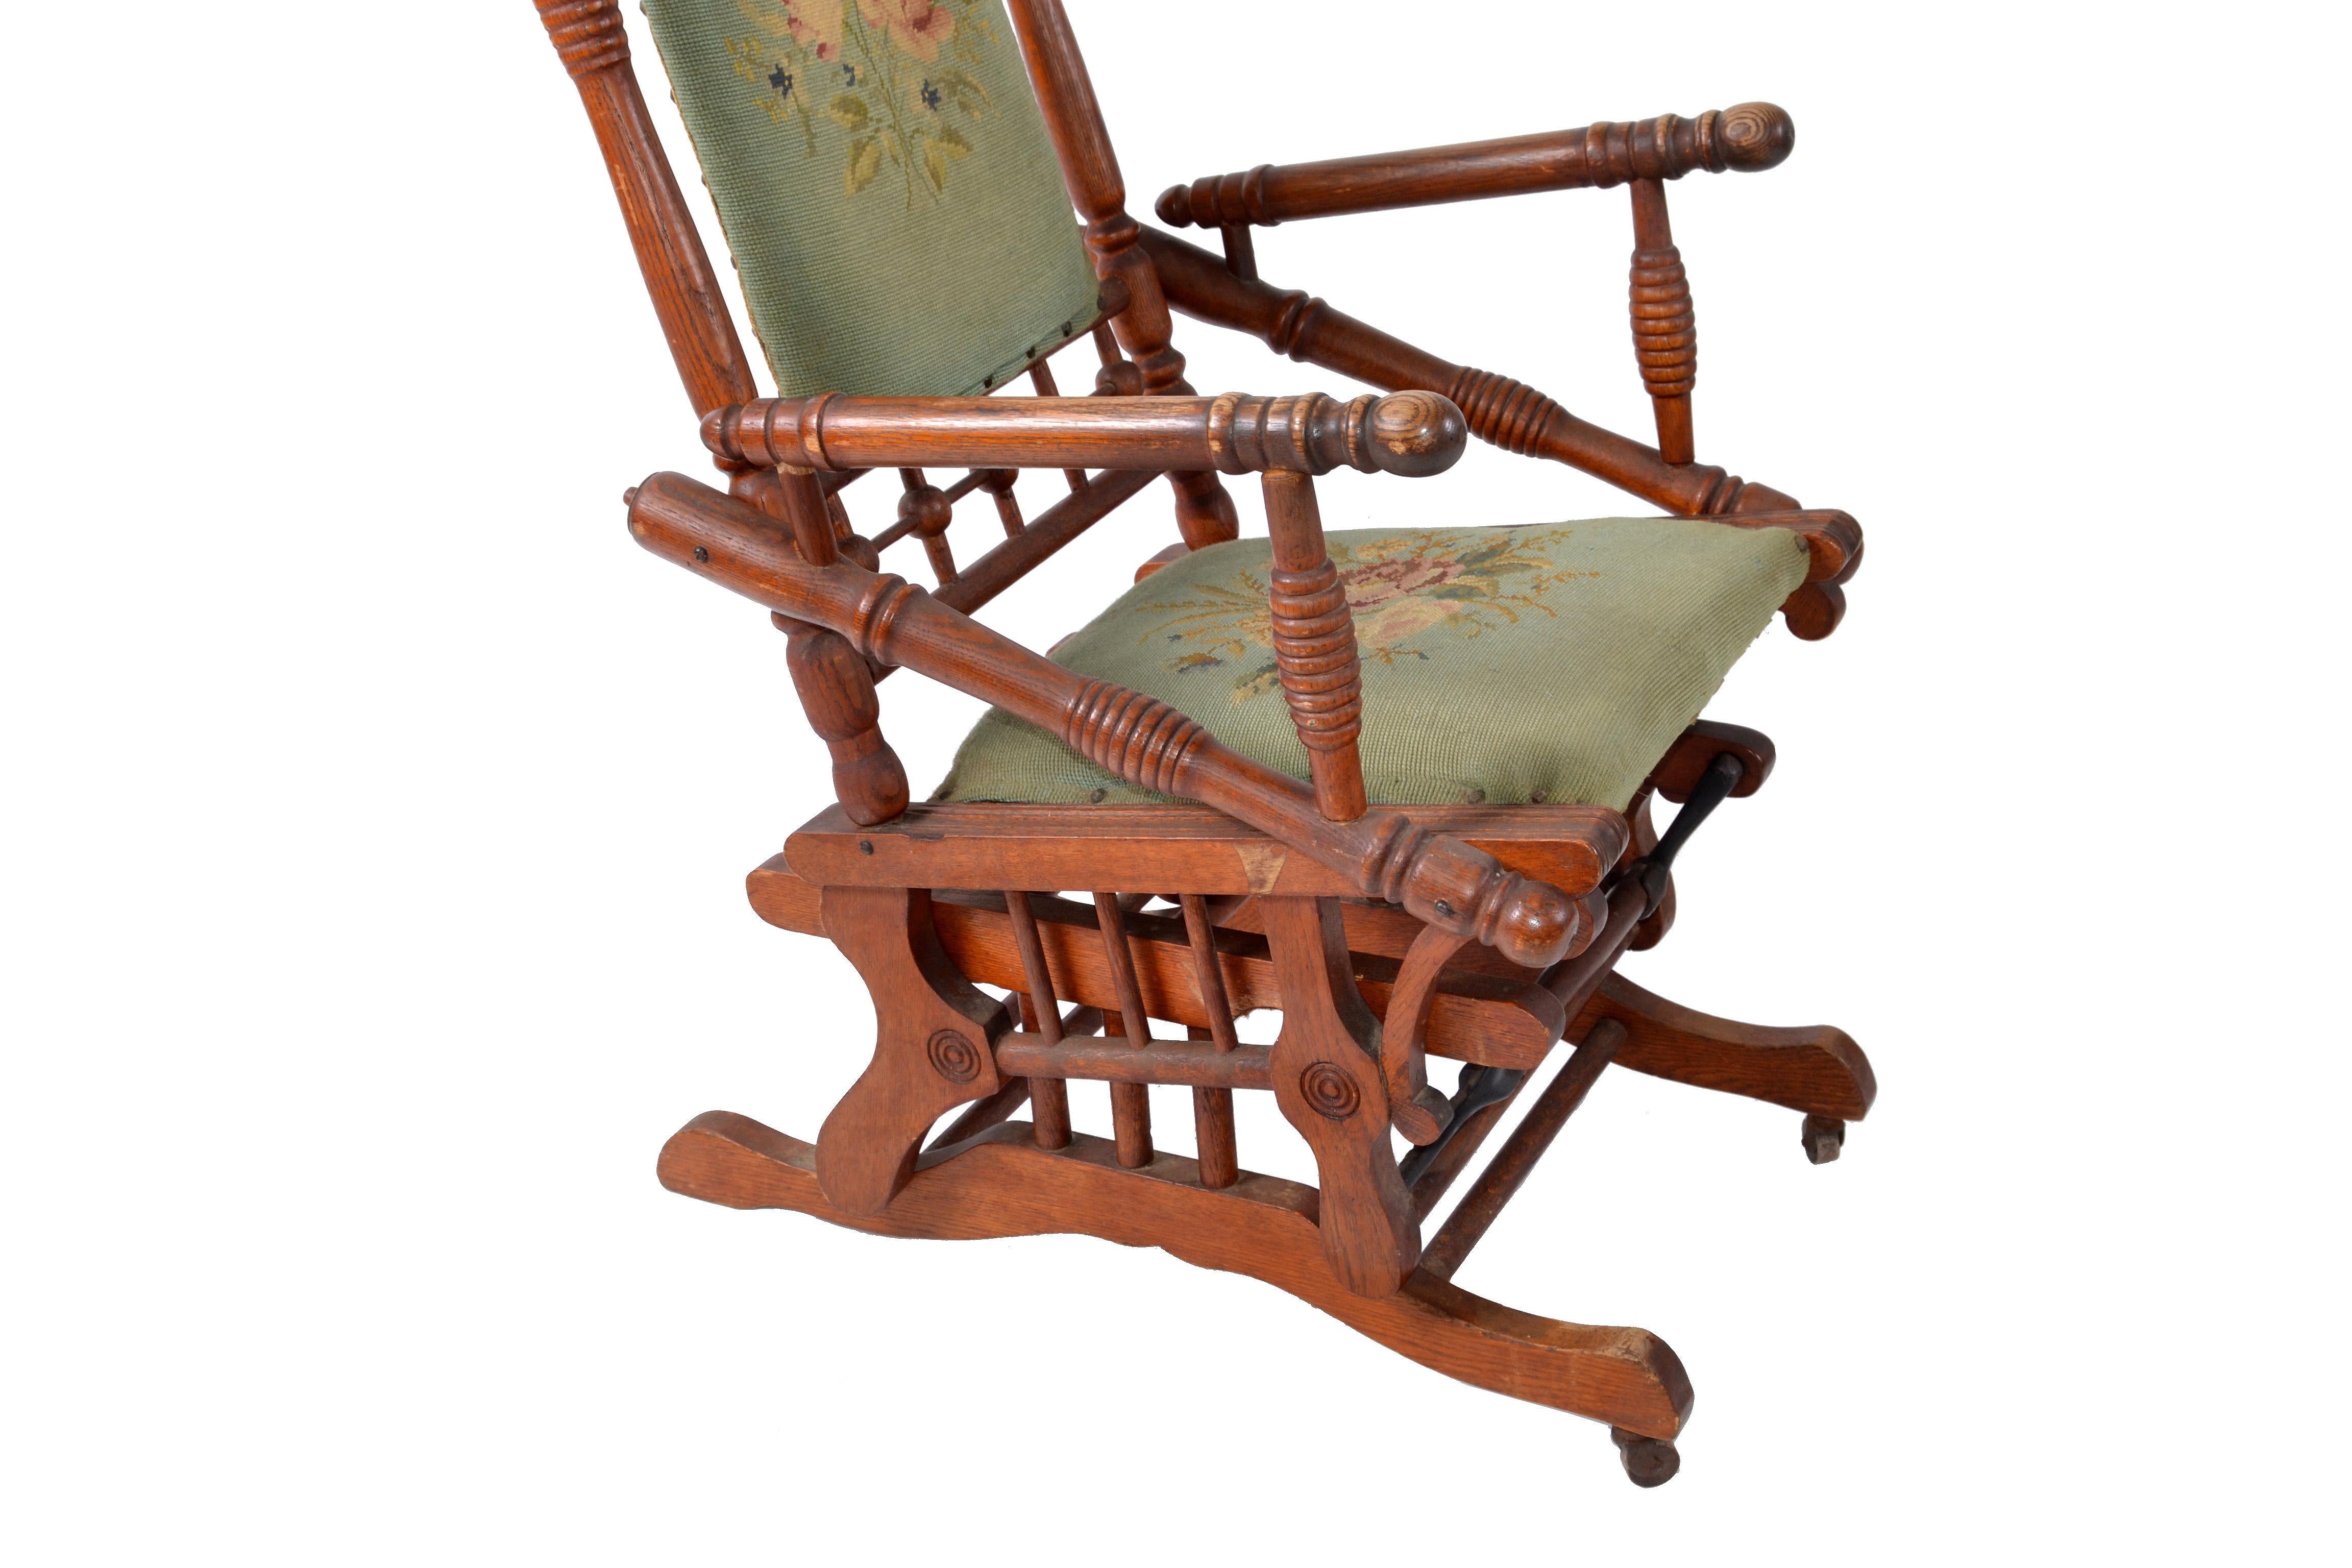 Antique Rocking Chair Hand Carved and Turned Walnut Wood Needlepoint Upholstery In Good Condition For Sale In Miami, FL